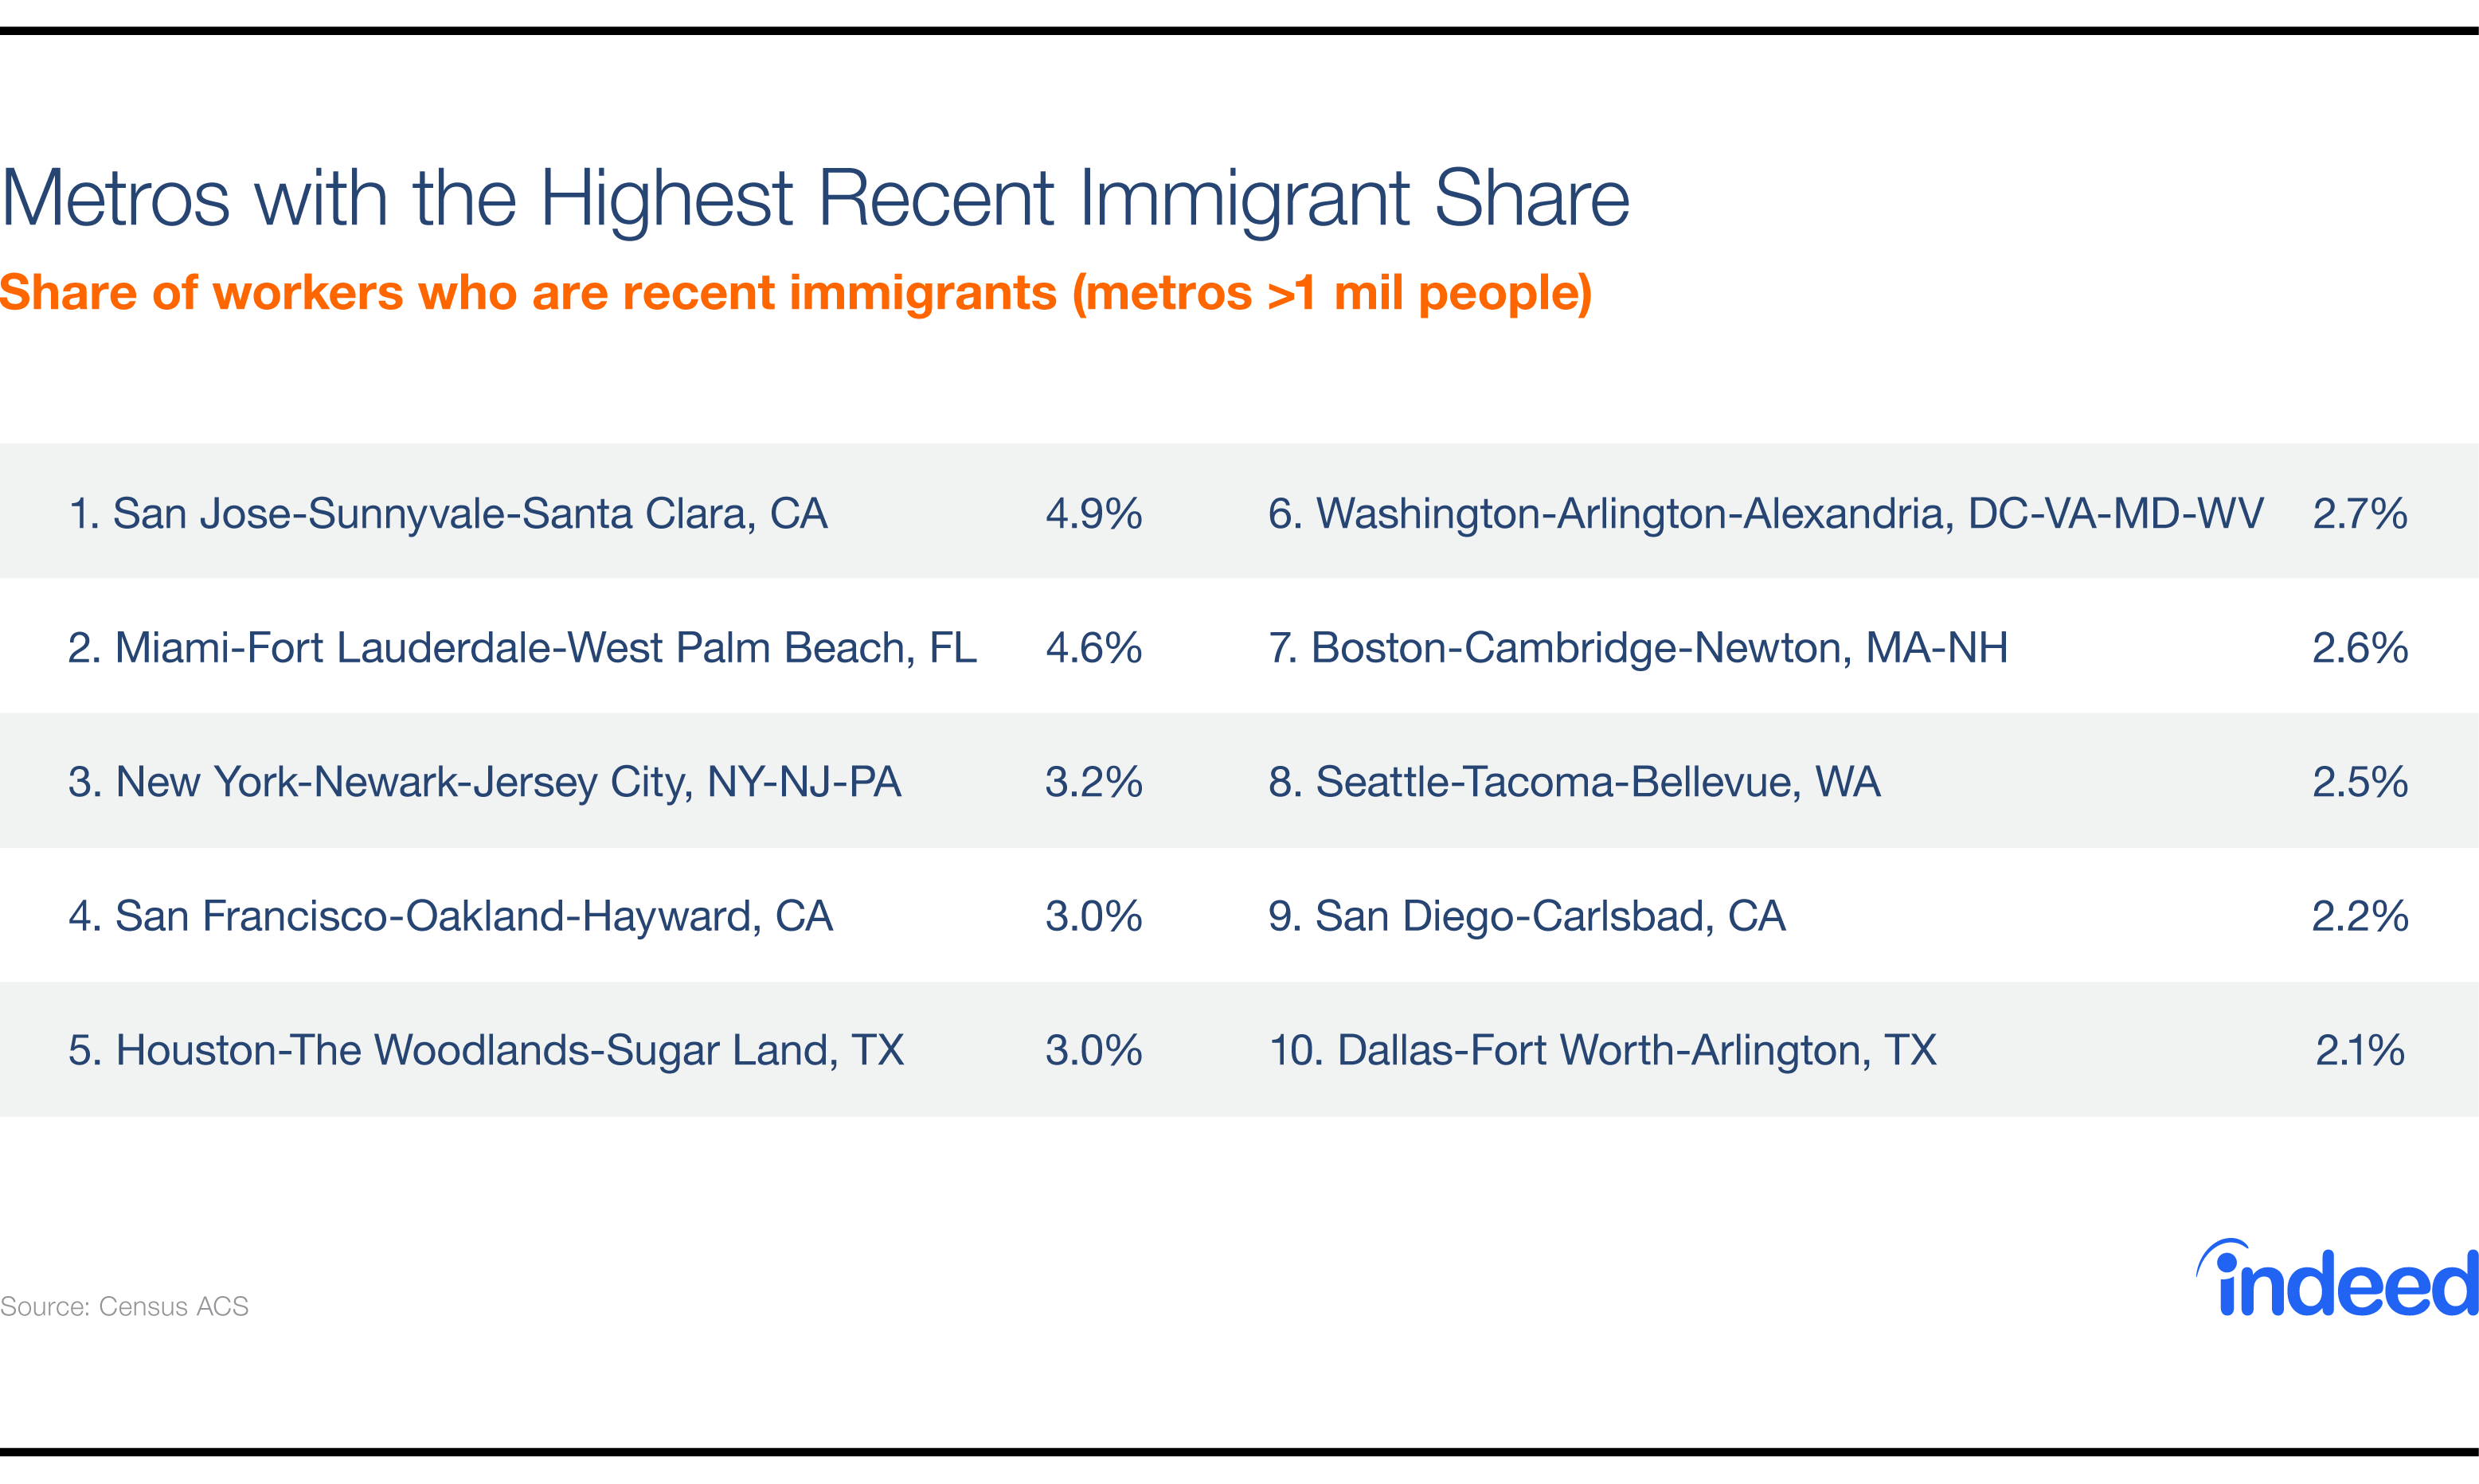 Metros with the Highest Recent Immigrant Share